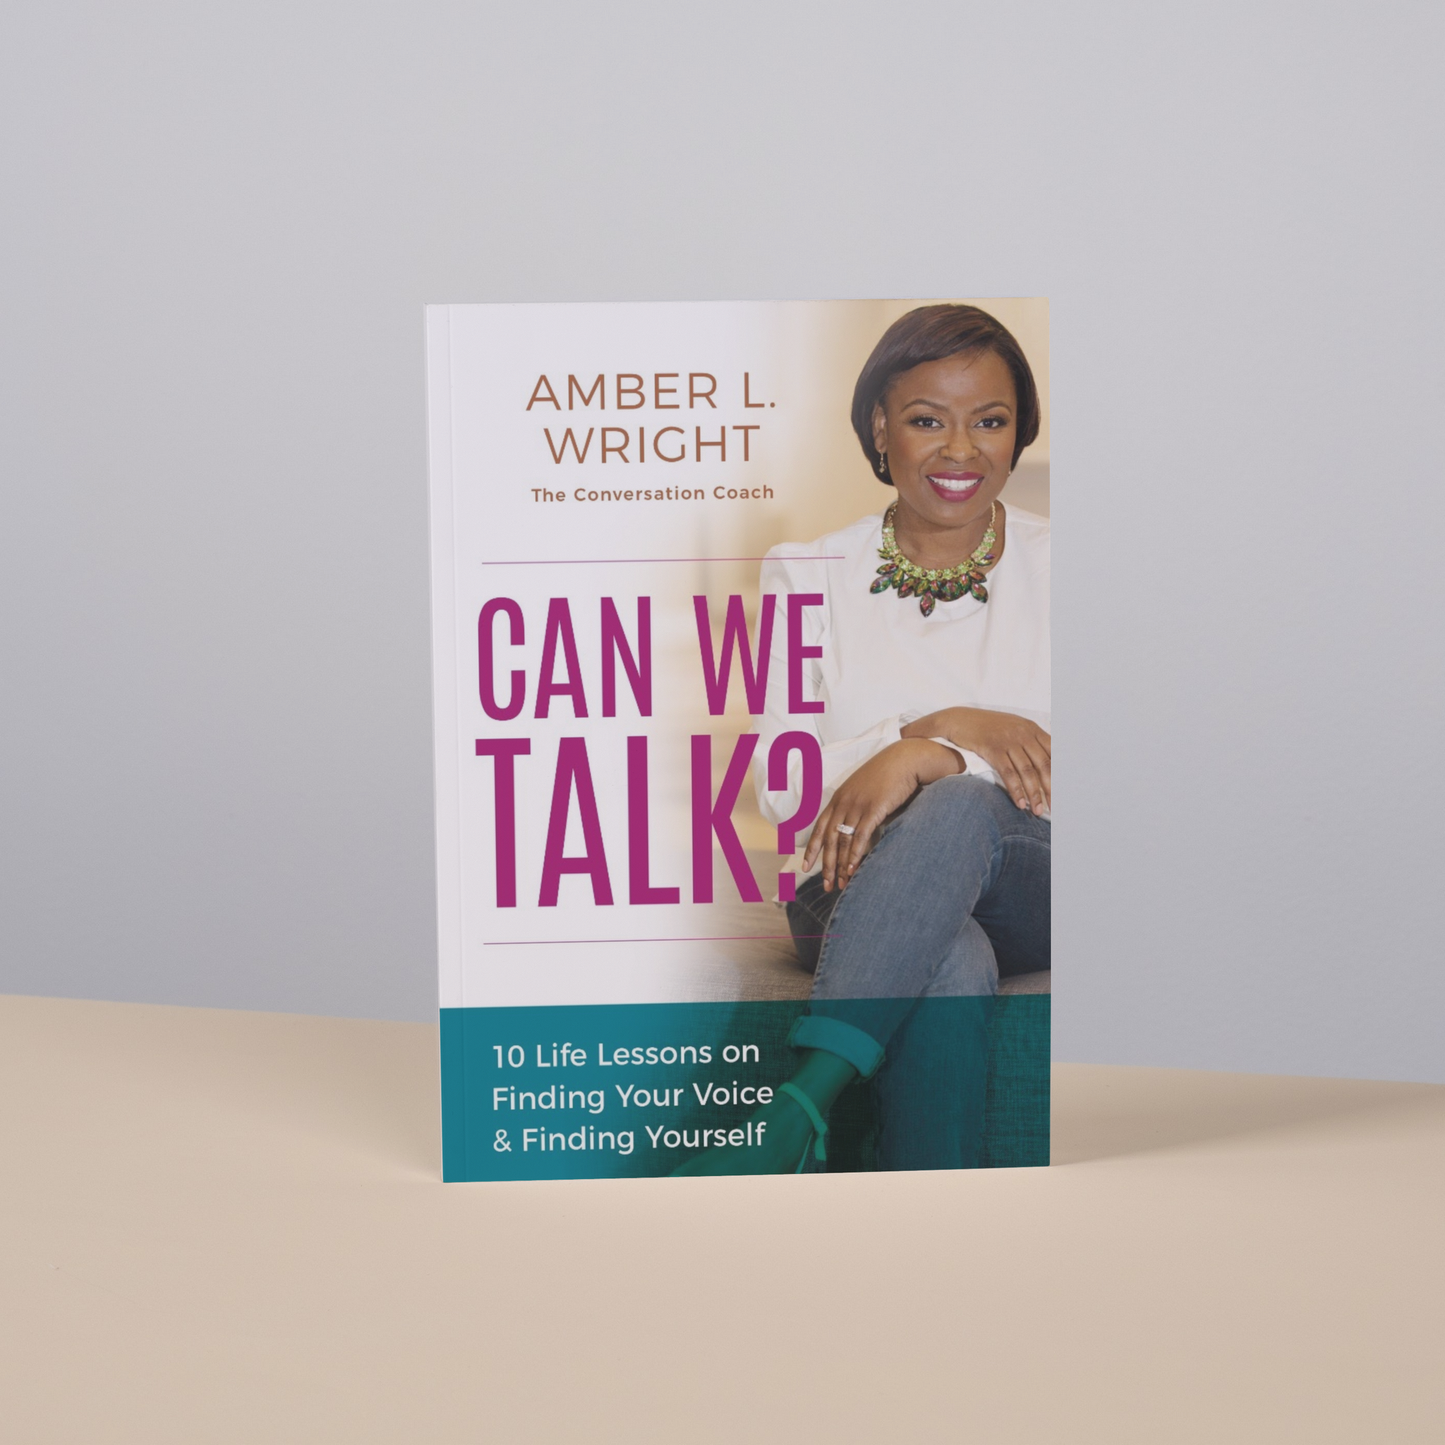 Can We Talk? 10 Life Lessons on Finding Your Voice & Finding Yourself